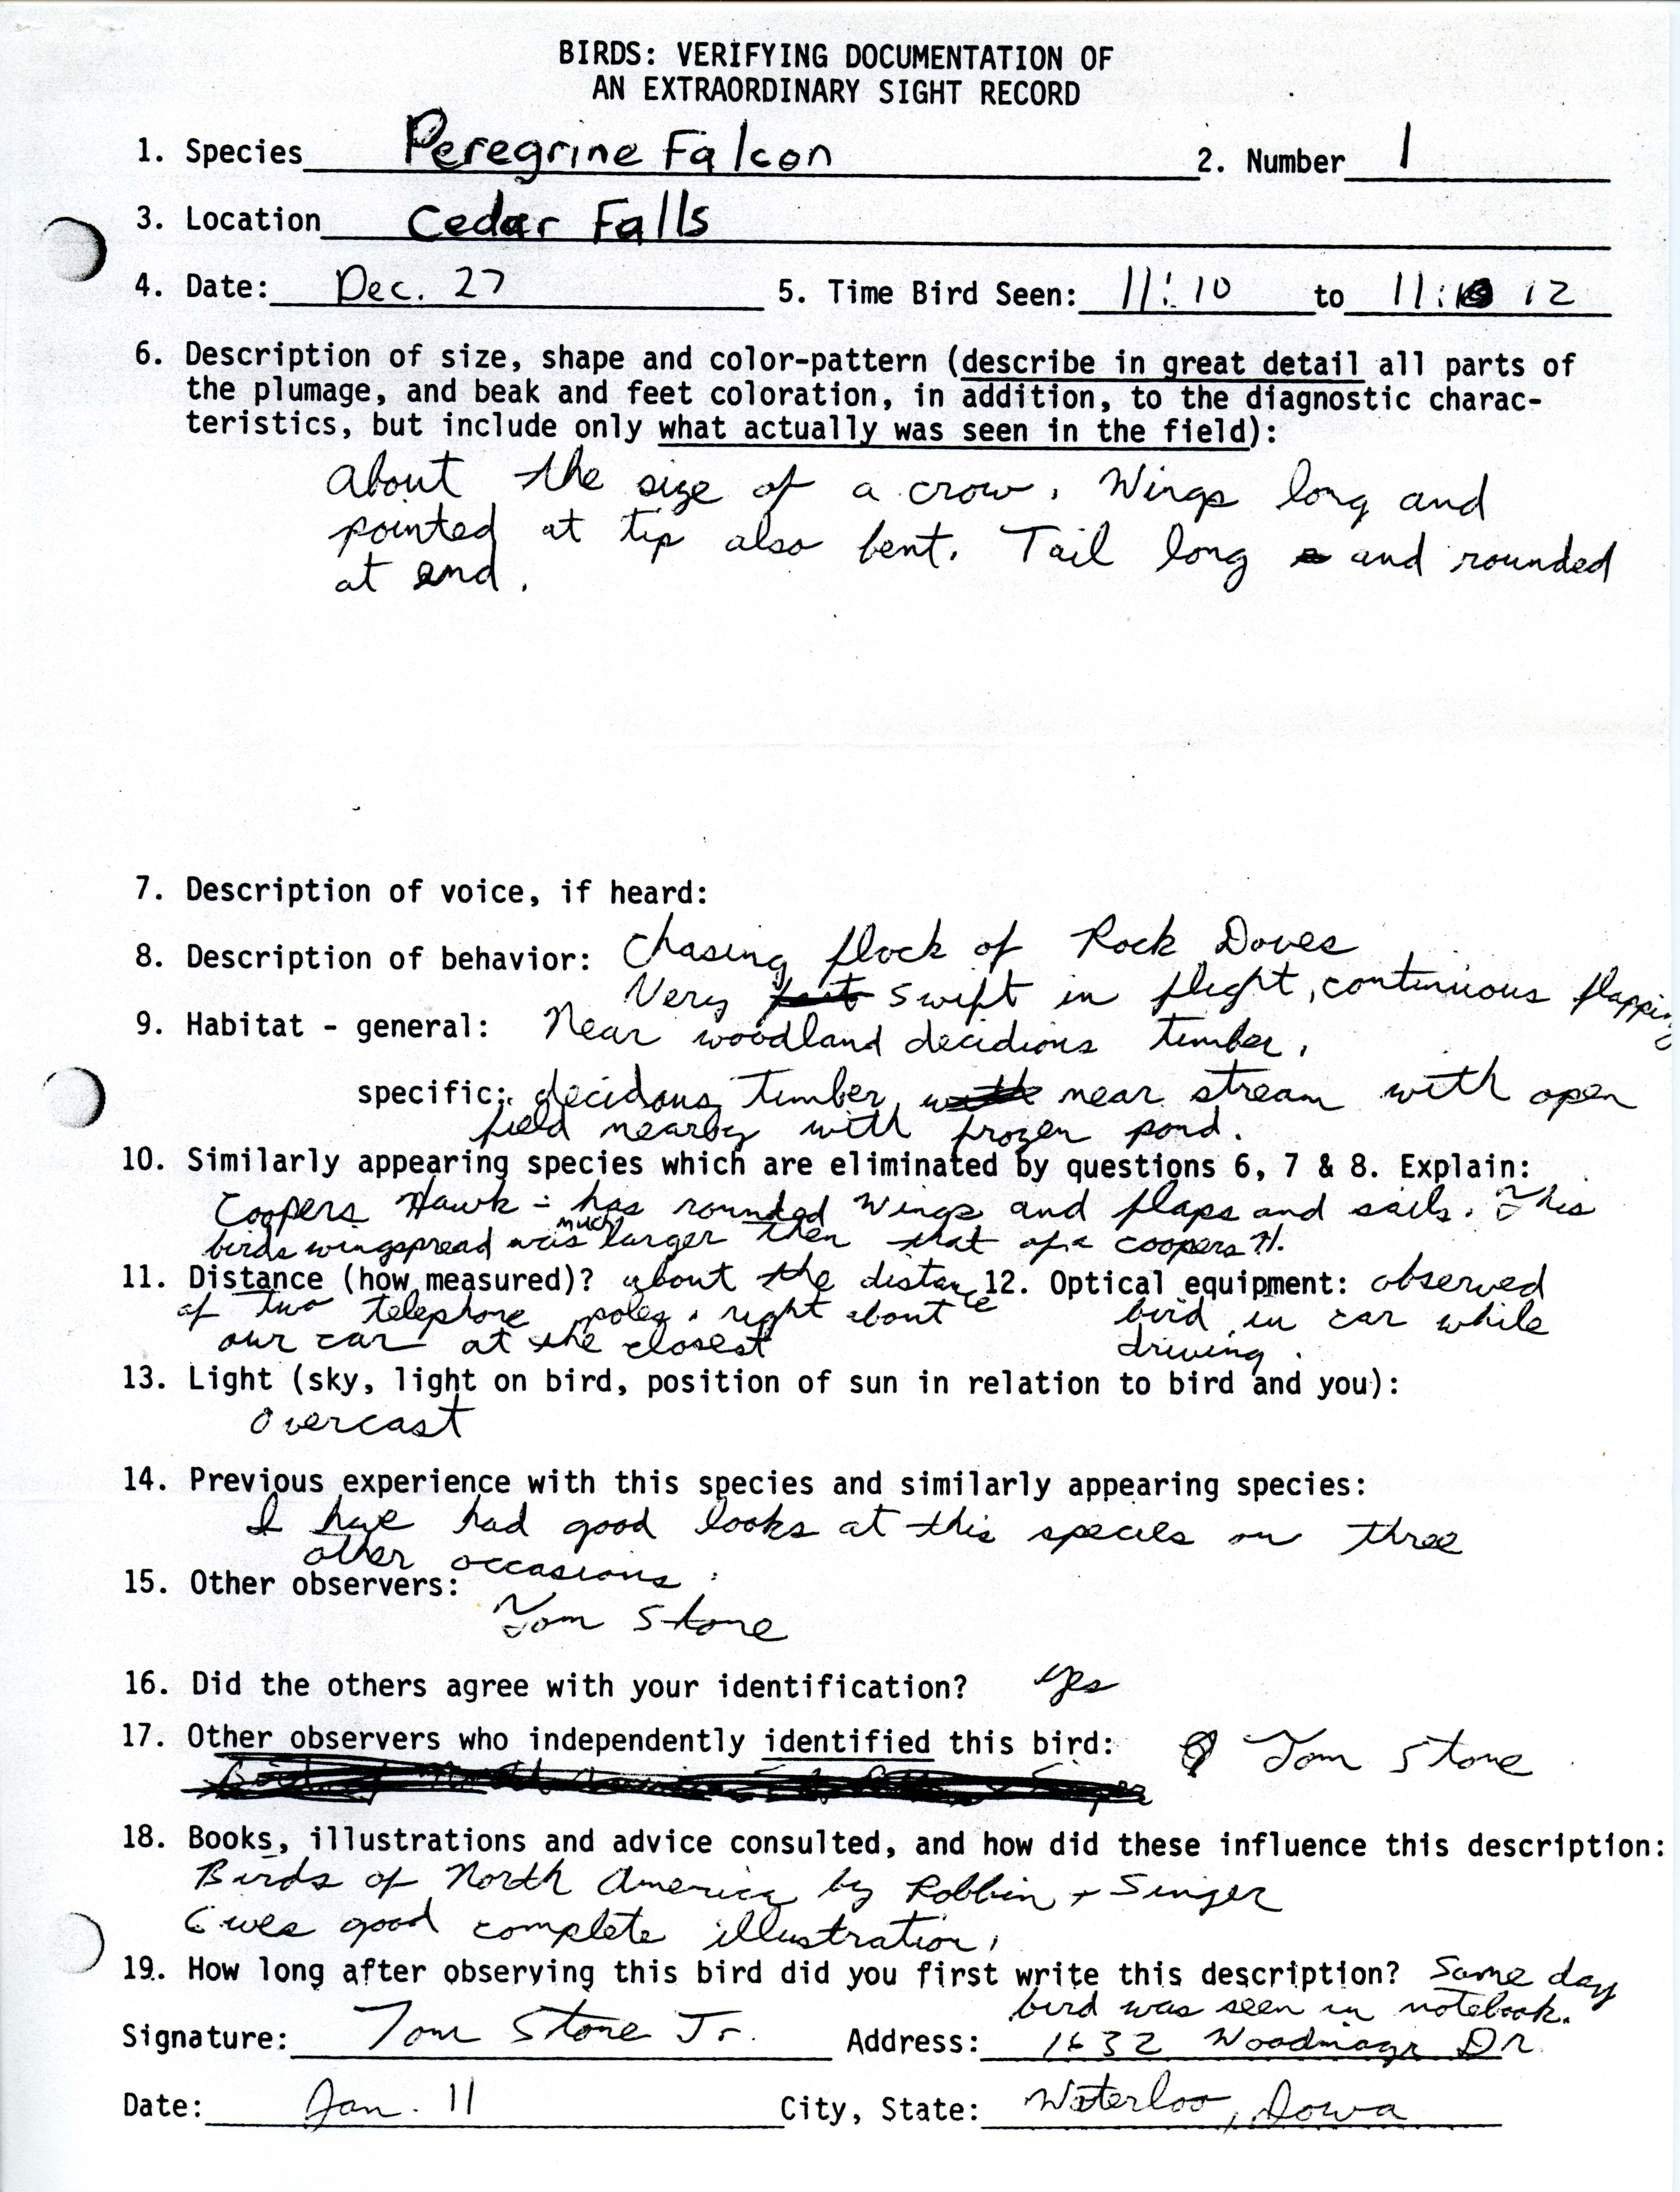 Verifying documentation form for Peregrine Falcon sighting submitted by Tom Stone, Jr., December 27 1980